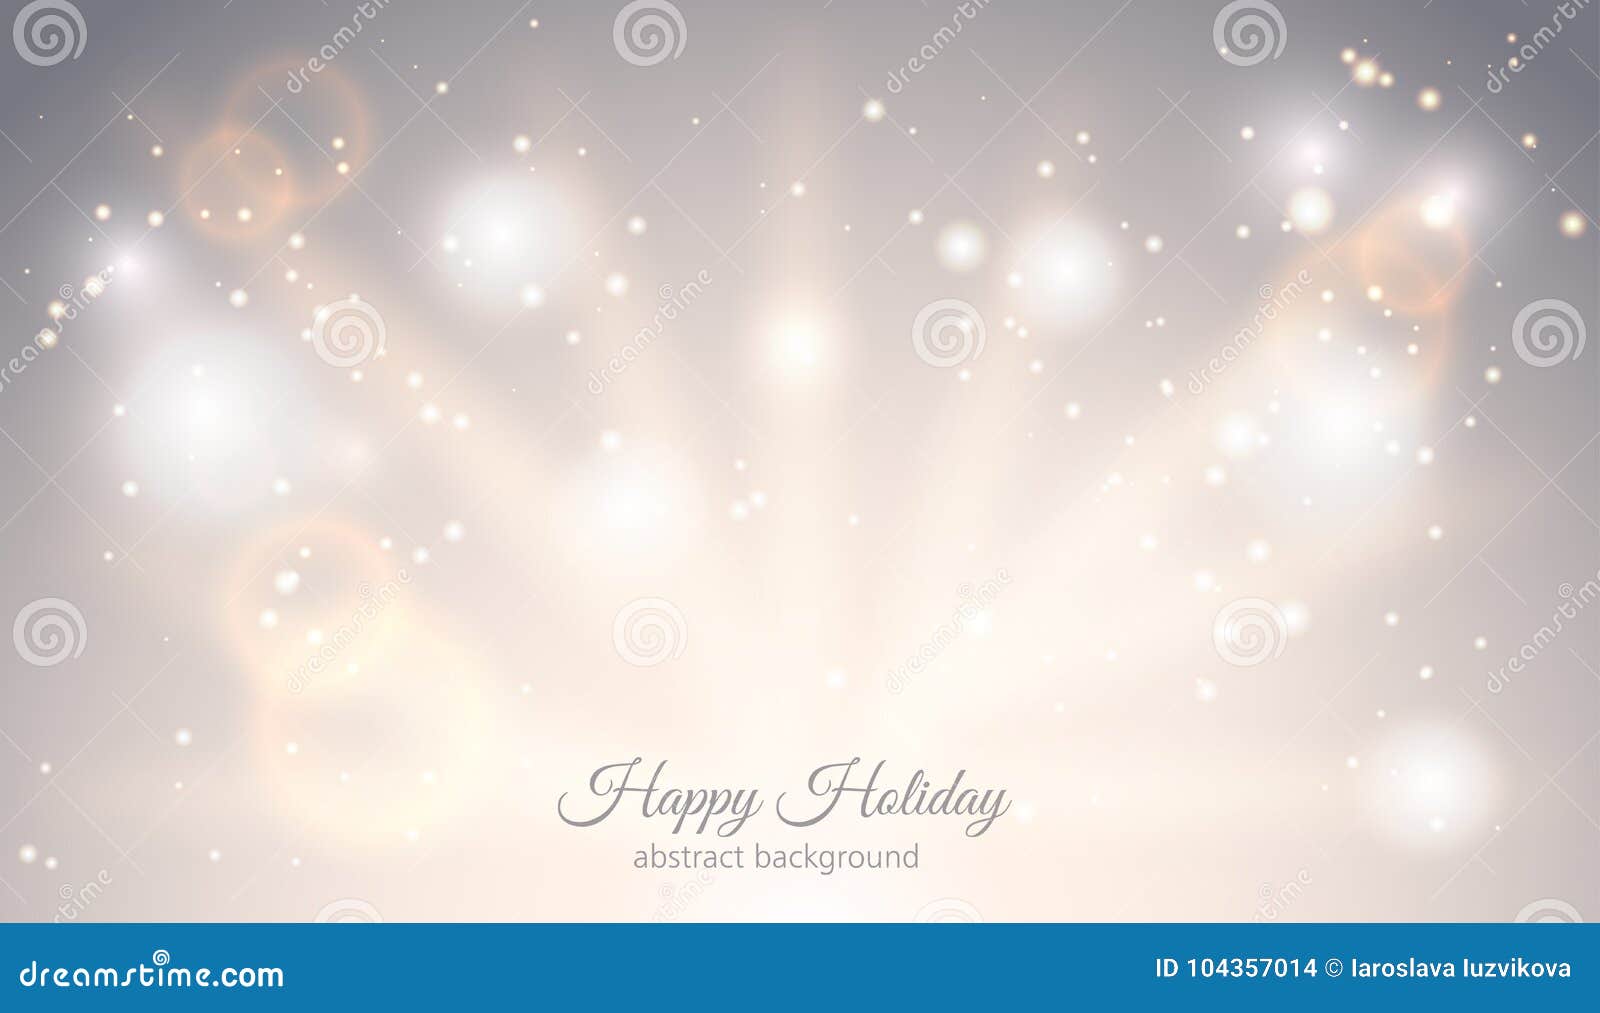 abstract sparkling light magic horizontal background. glow bright festive fantasy banner with rays sparks ligh effect